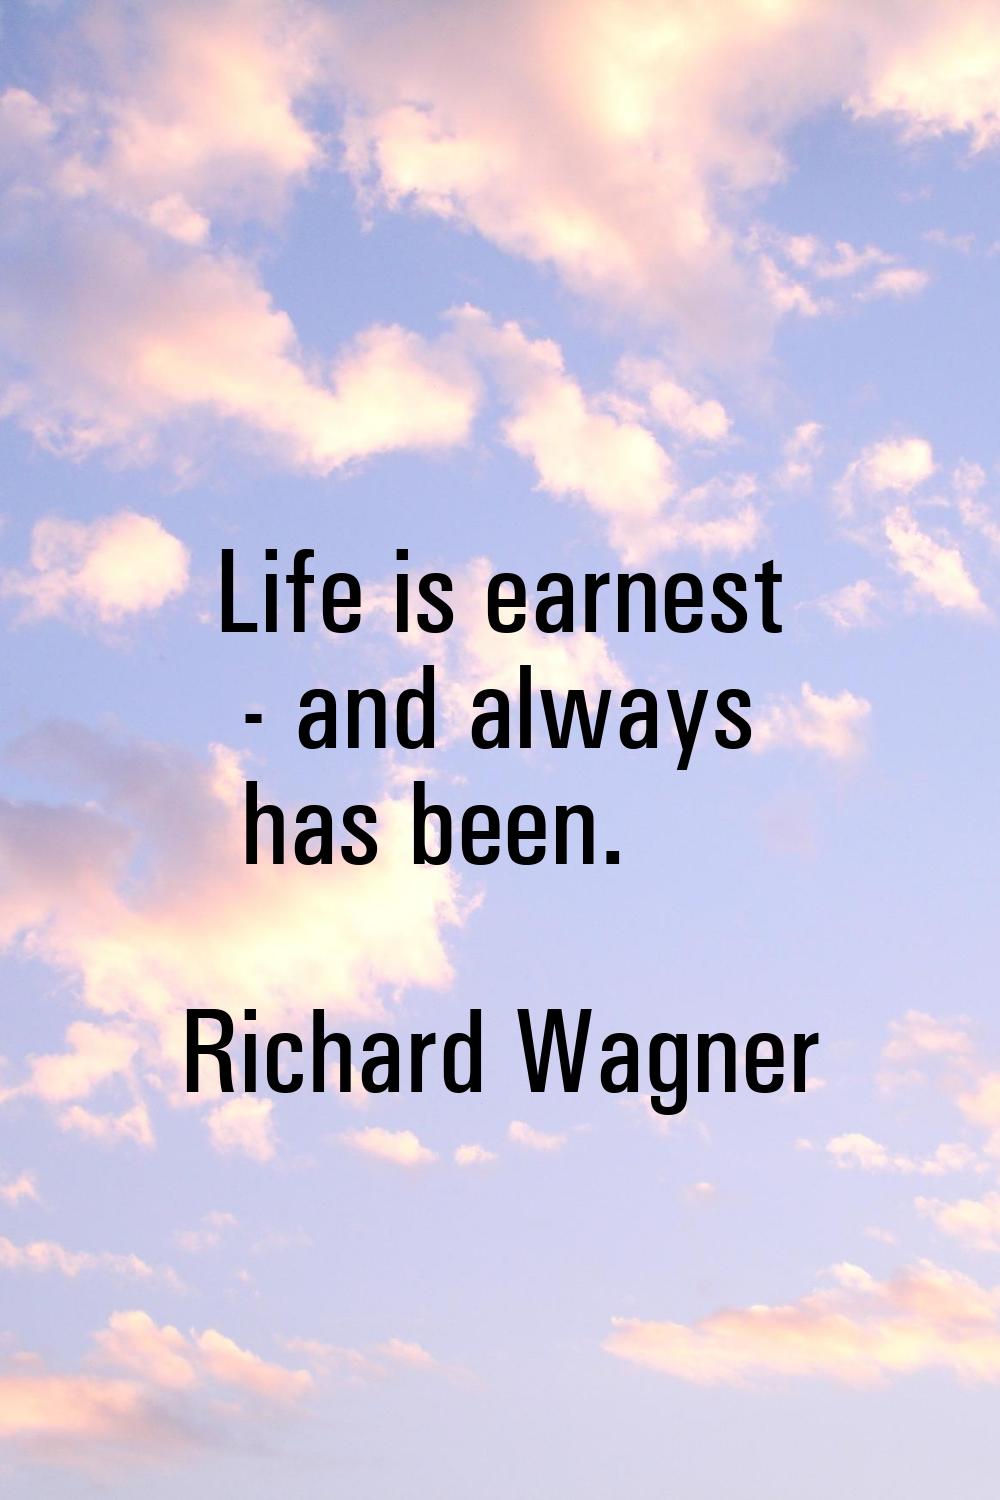 Life is earnest - and always has been.